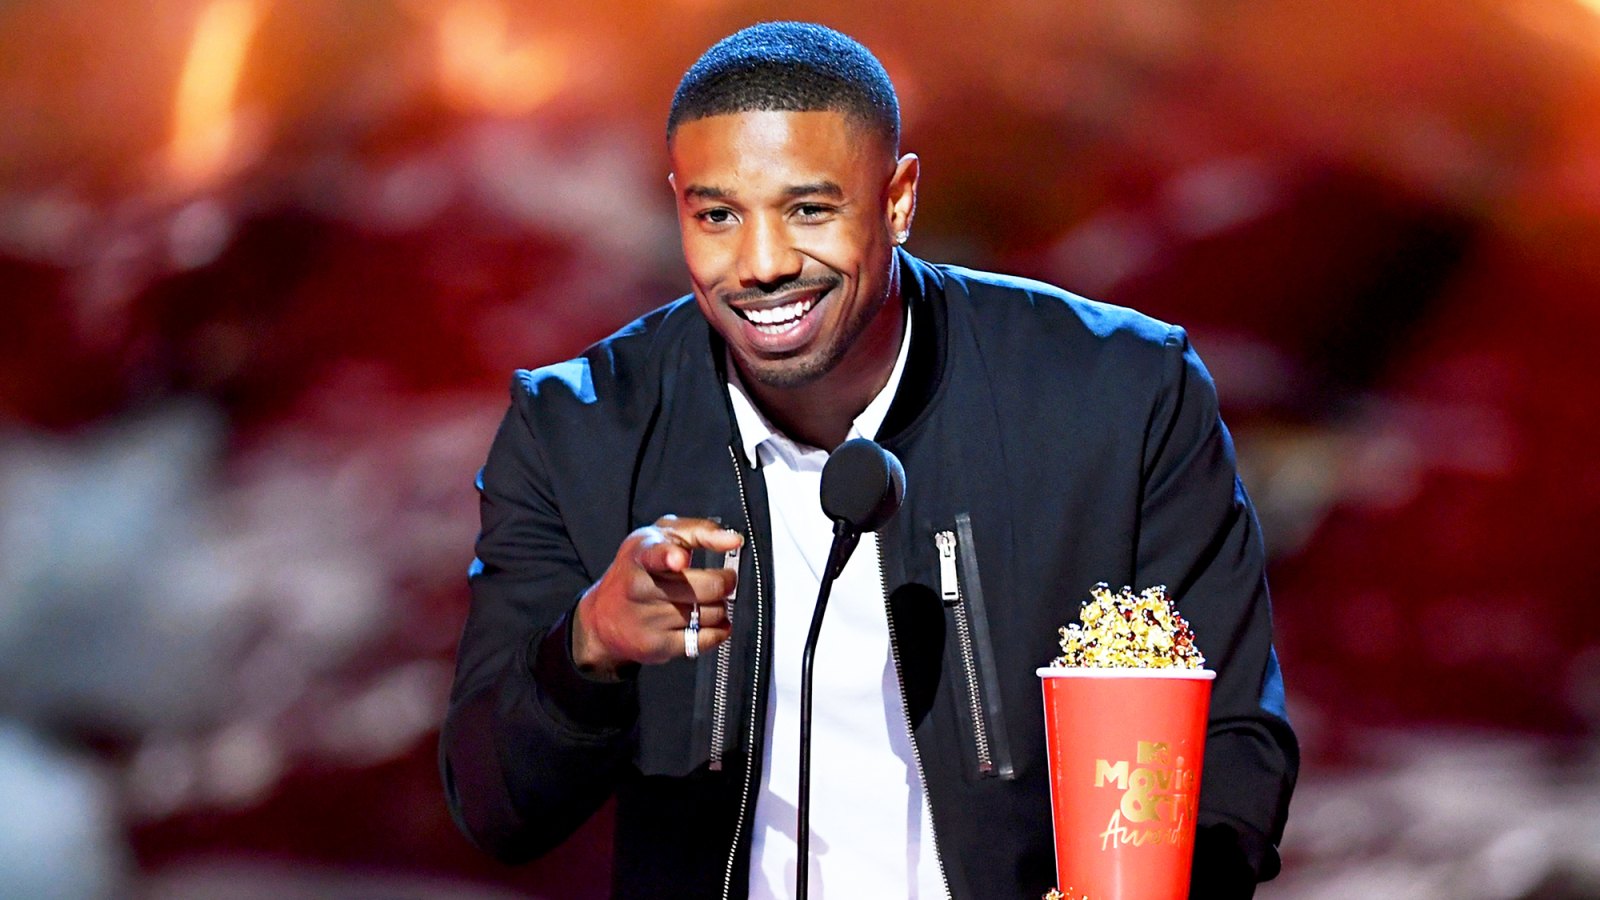 Michael B. Jordan accepts the Best Villain award for 'Black Panther' onstage during the 2018 MTV Movie And TV Awards at Barker Hangar on June 16, 2018 in Santa Monica, California.